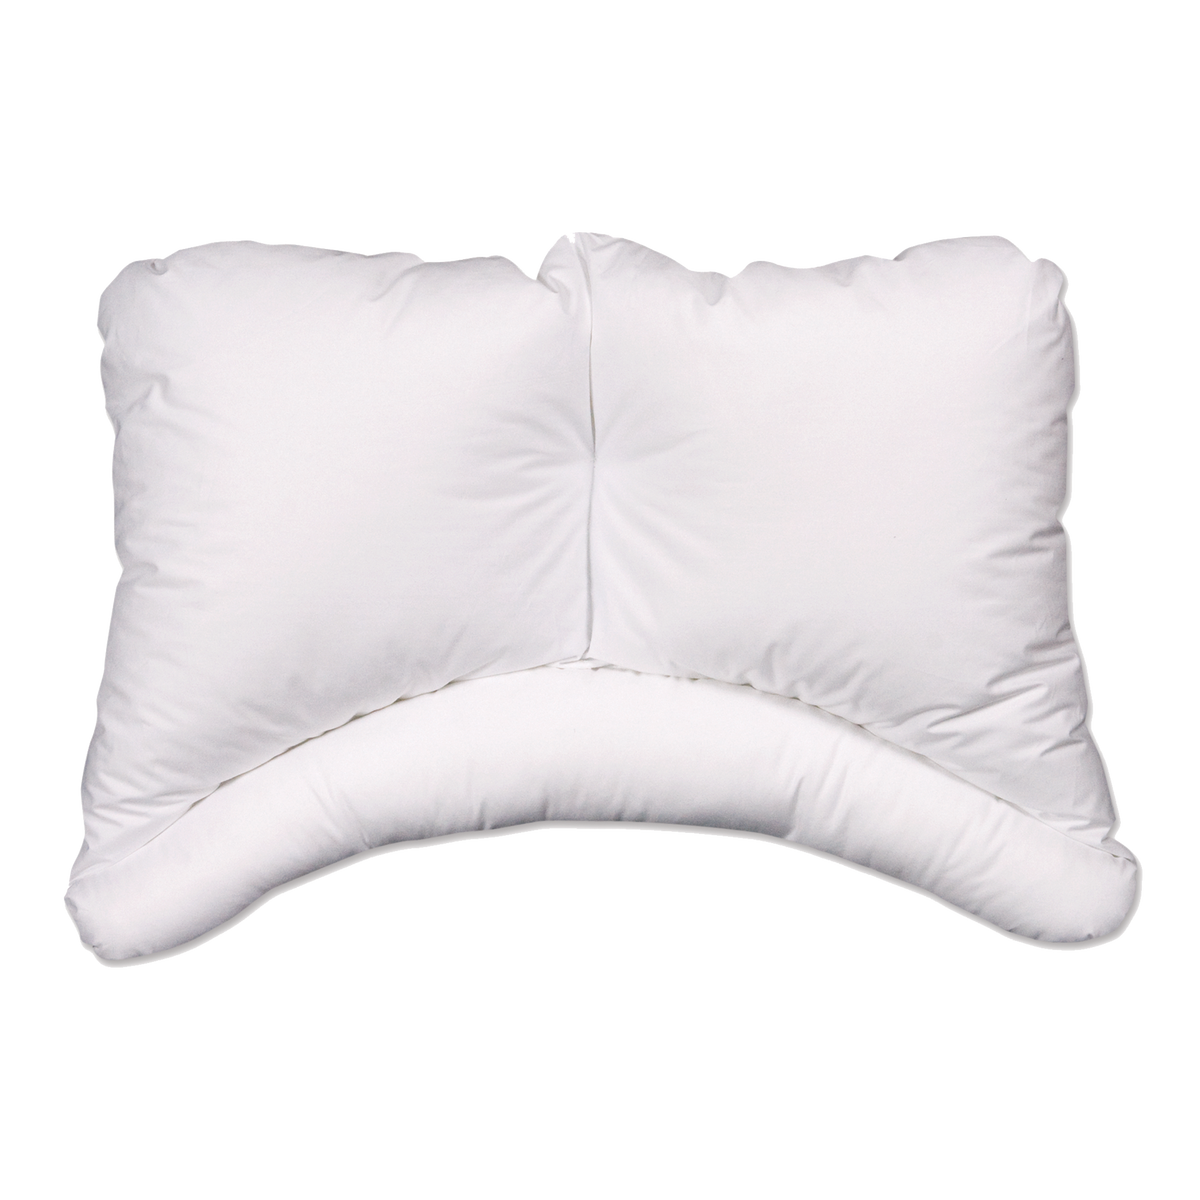 https://www.coreproducts.com/cdn/shop/products/fib-265-267-cervalign-cervical-pillow-white-front-coreproducts_1200x1200.png?v=1610388999